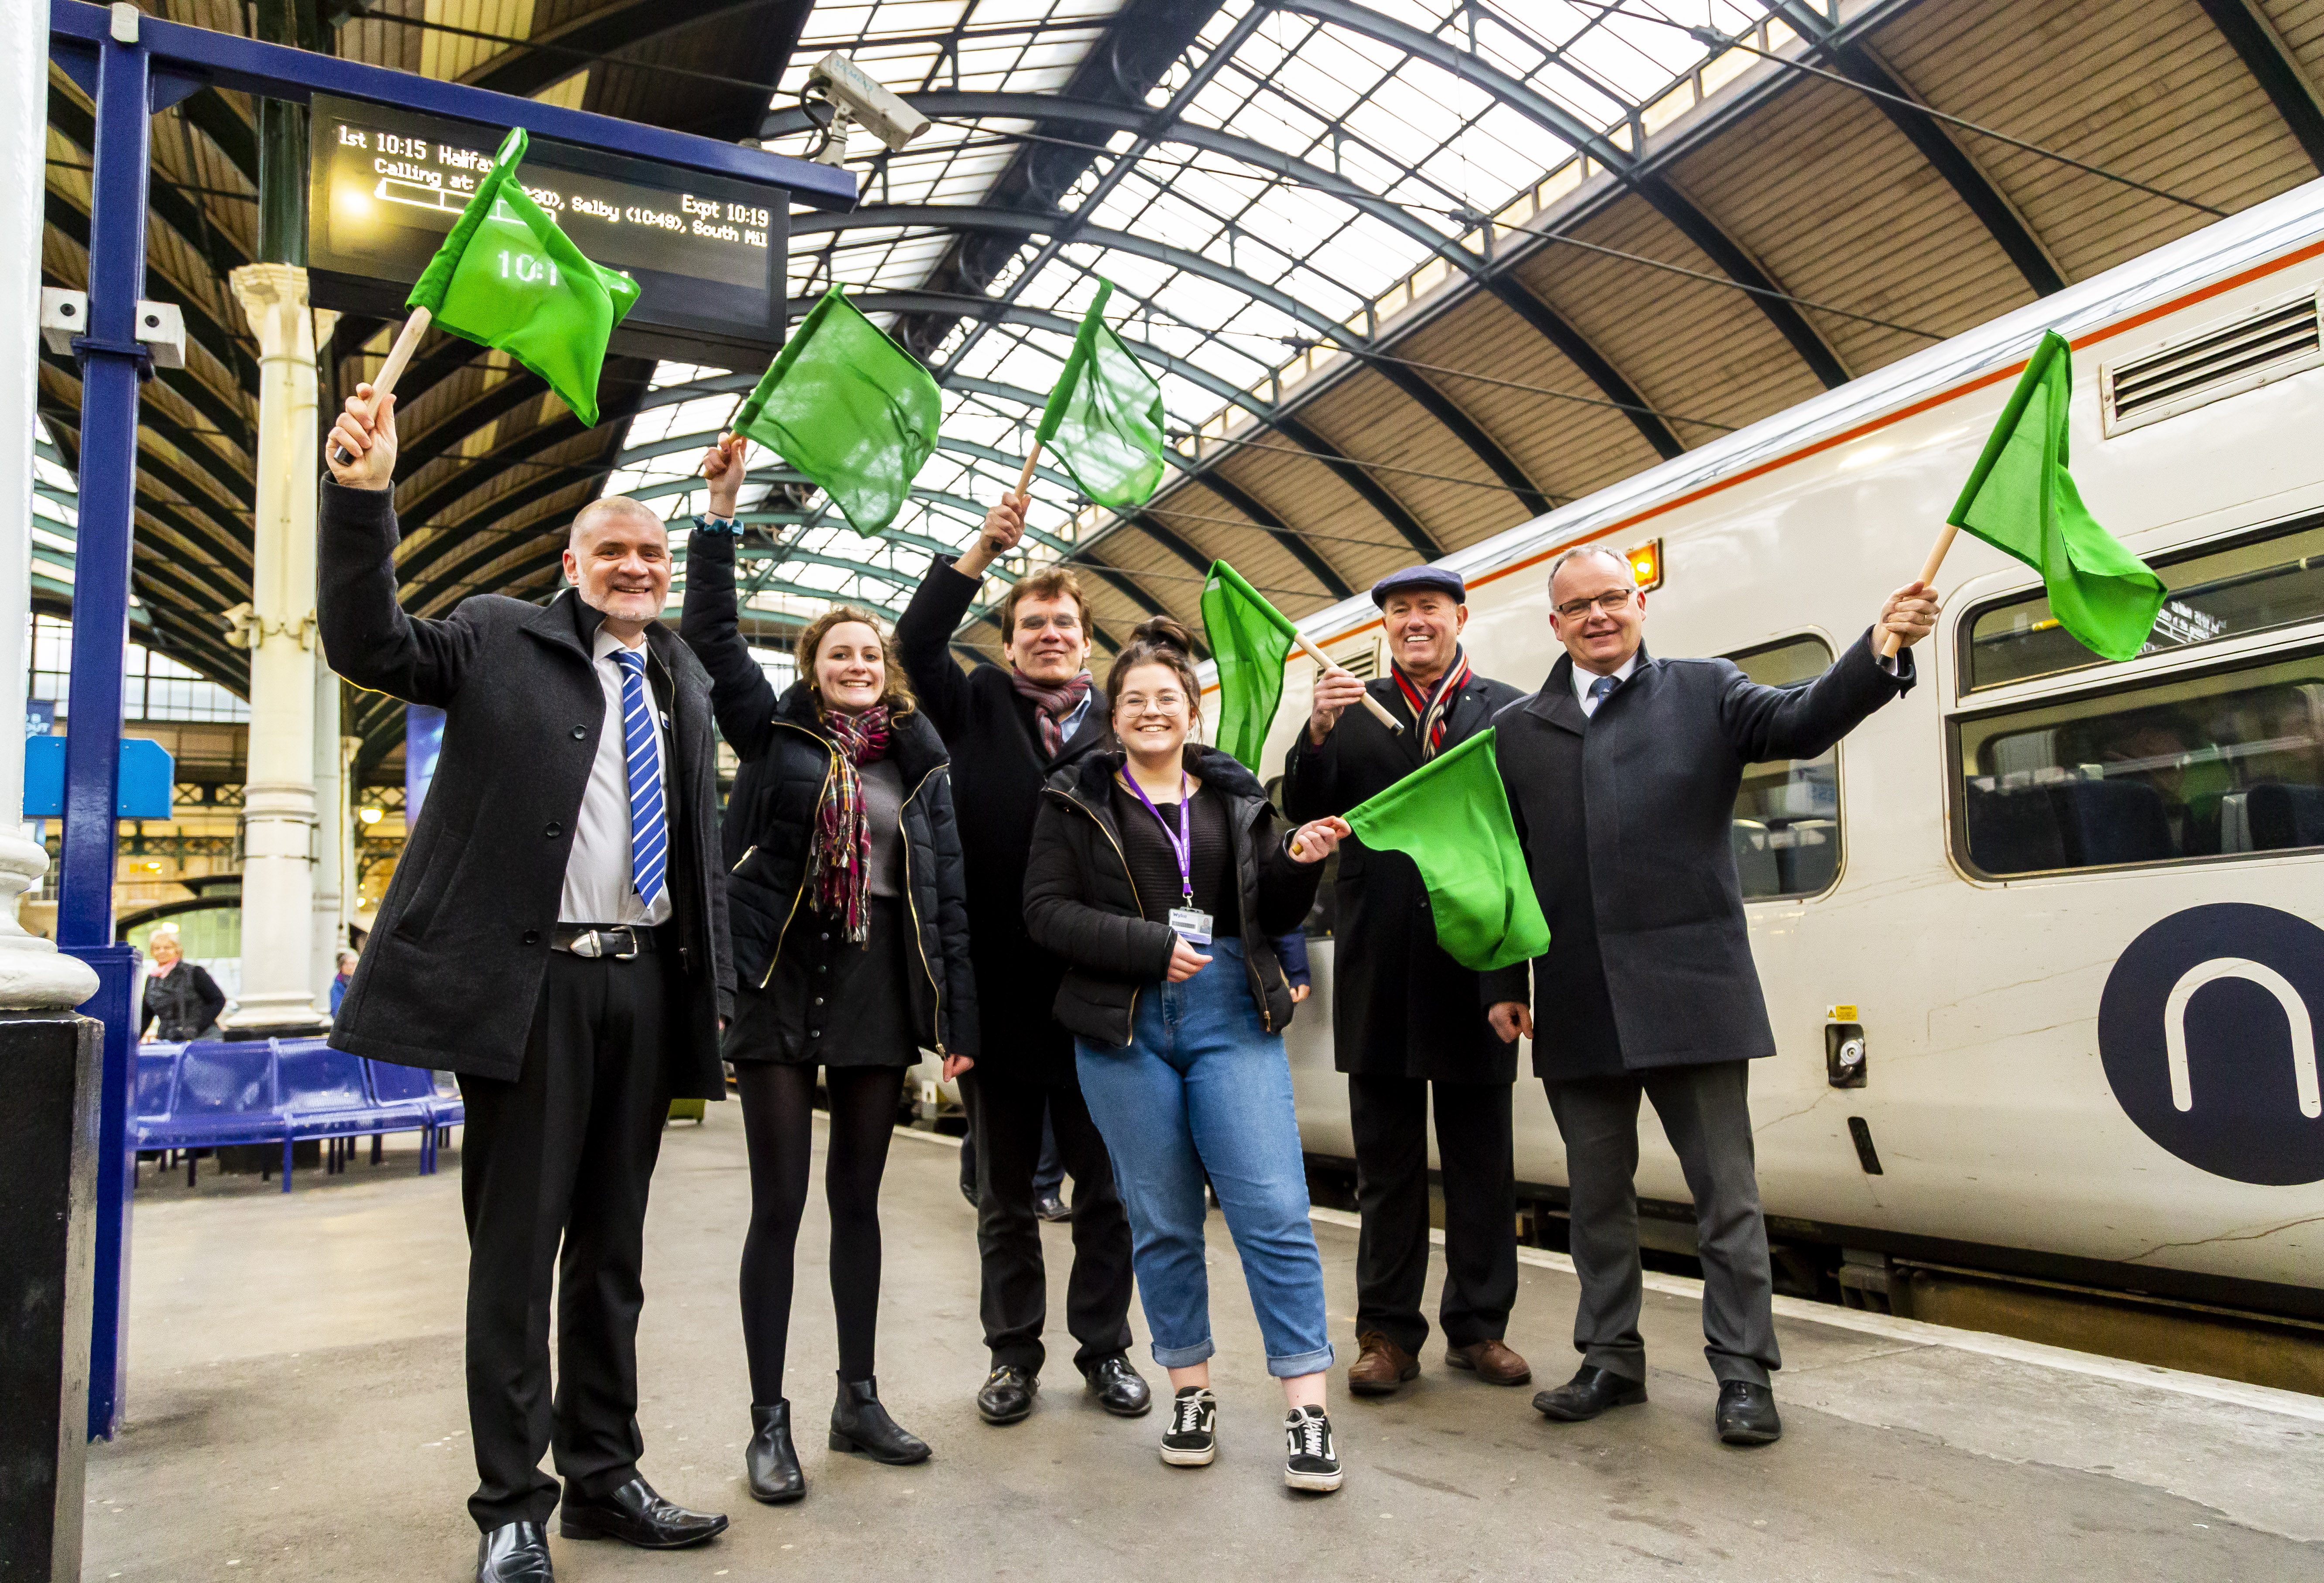 People wave off a new train at Hull Paragon Station